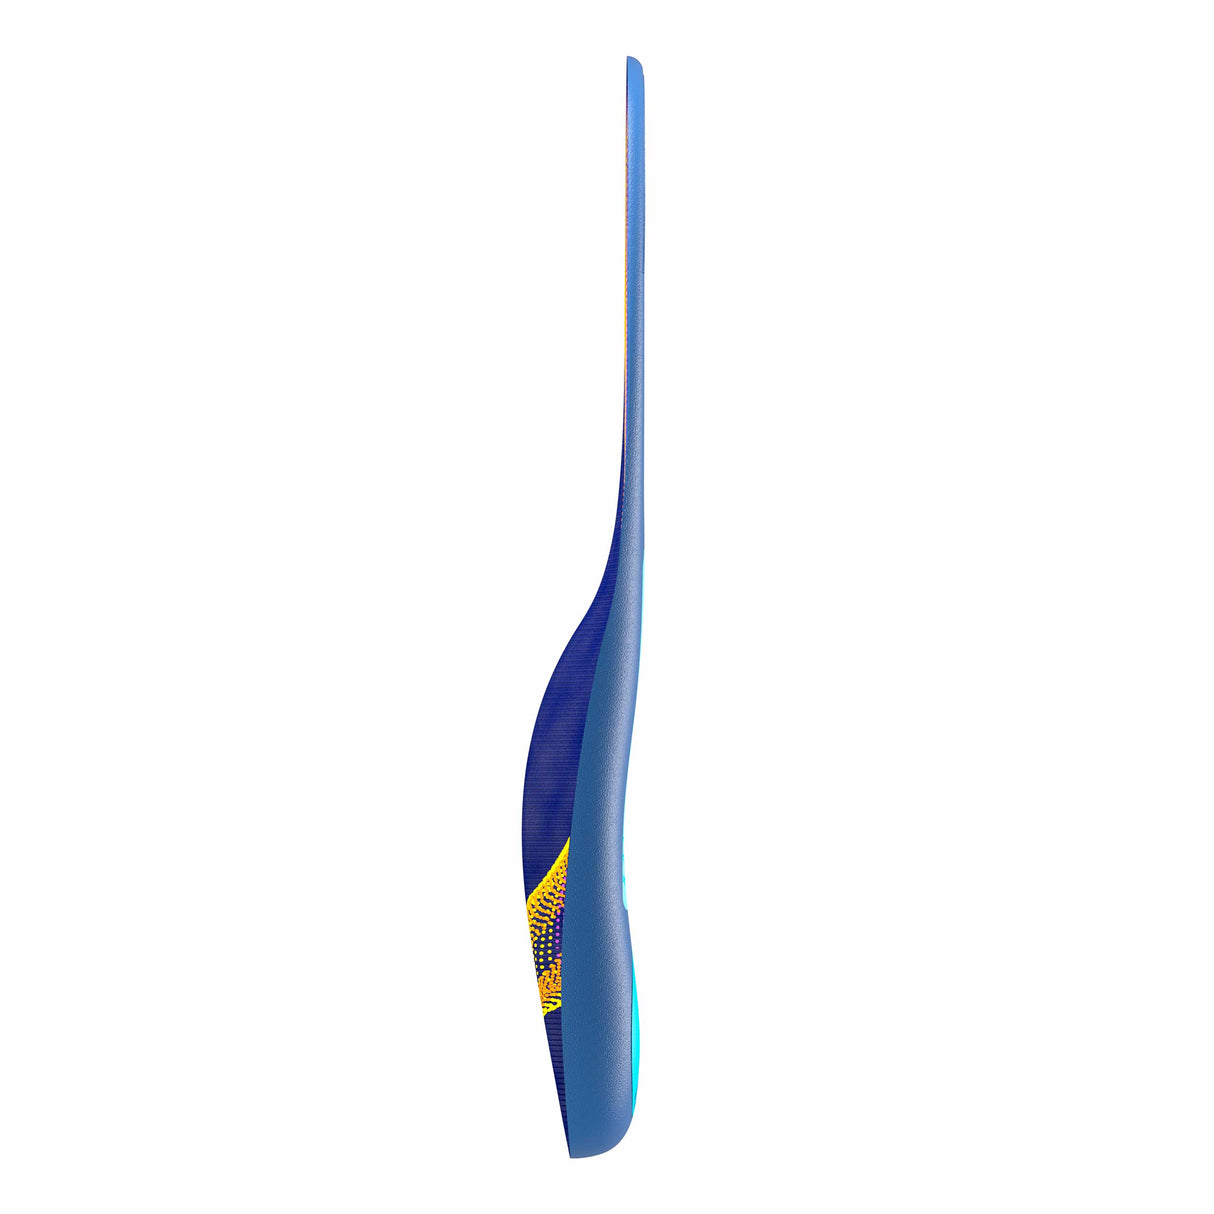 image of the side of plantar fasciitis sized to fit insole